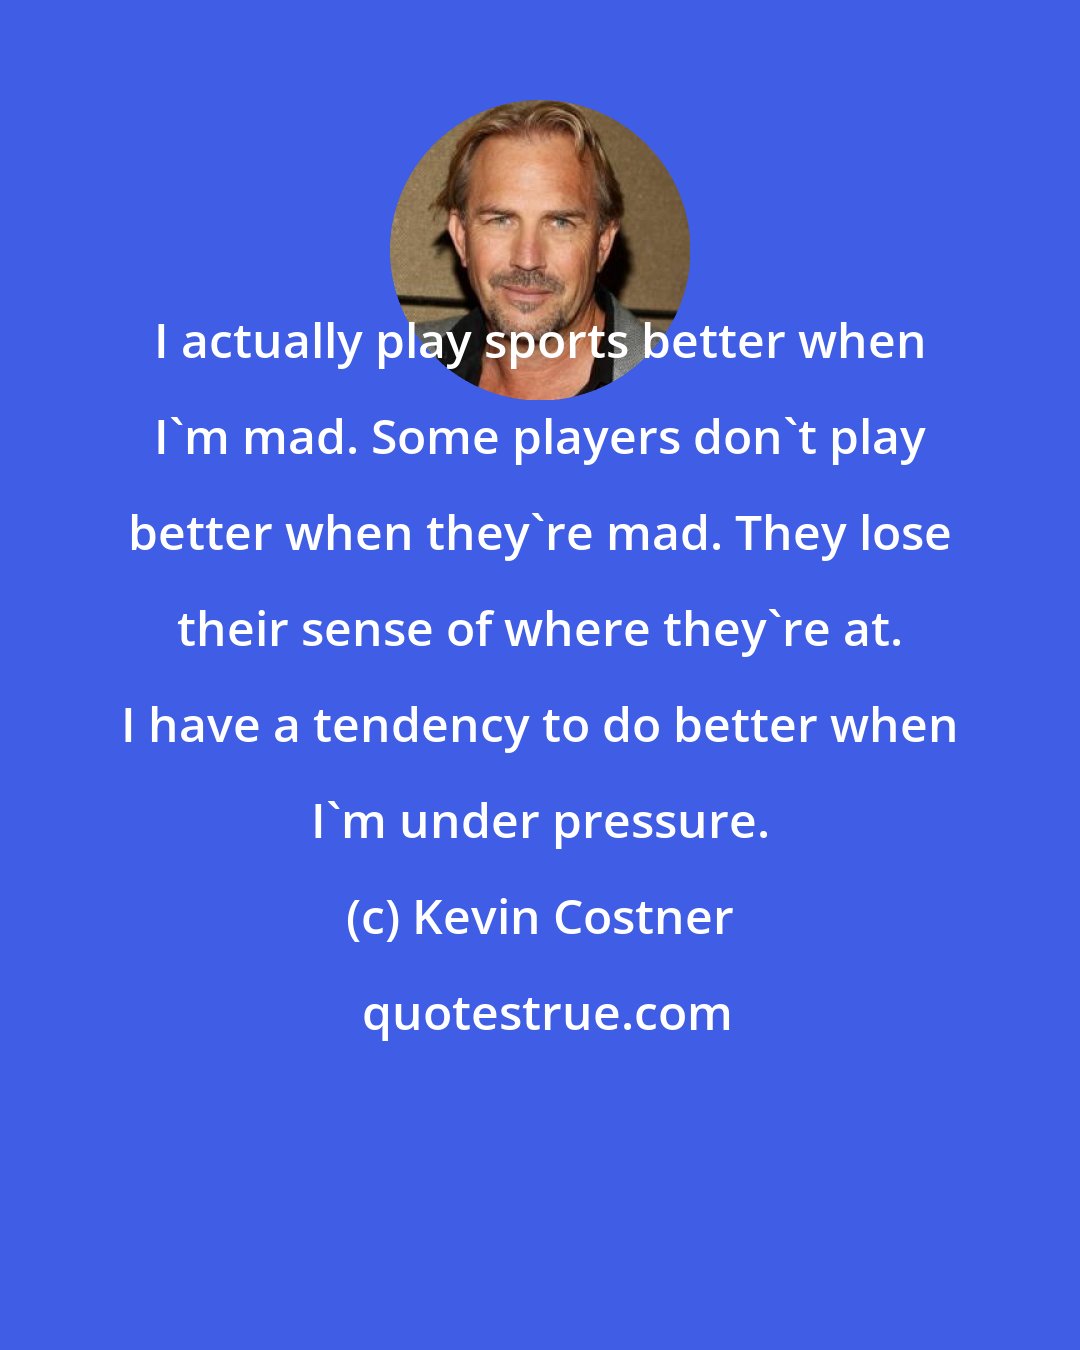 Kevin Costner: I actually play sports better when I'm mad. Some players don't play better when they're mad. They lose their sense of where they're at. I have a tendency to do better when I'm under pressure.